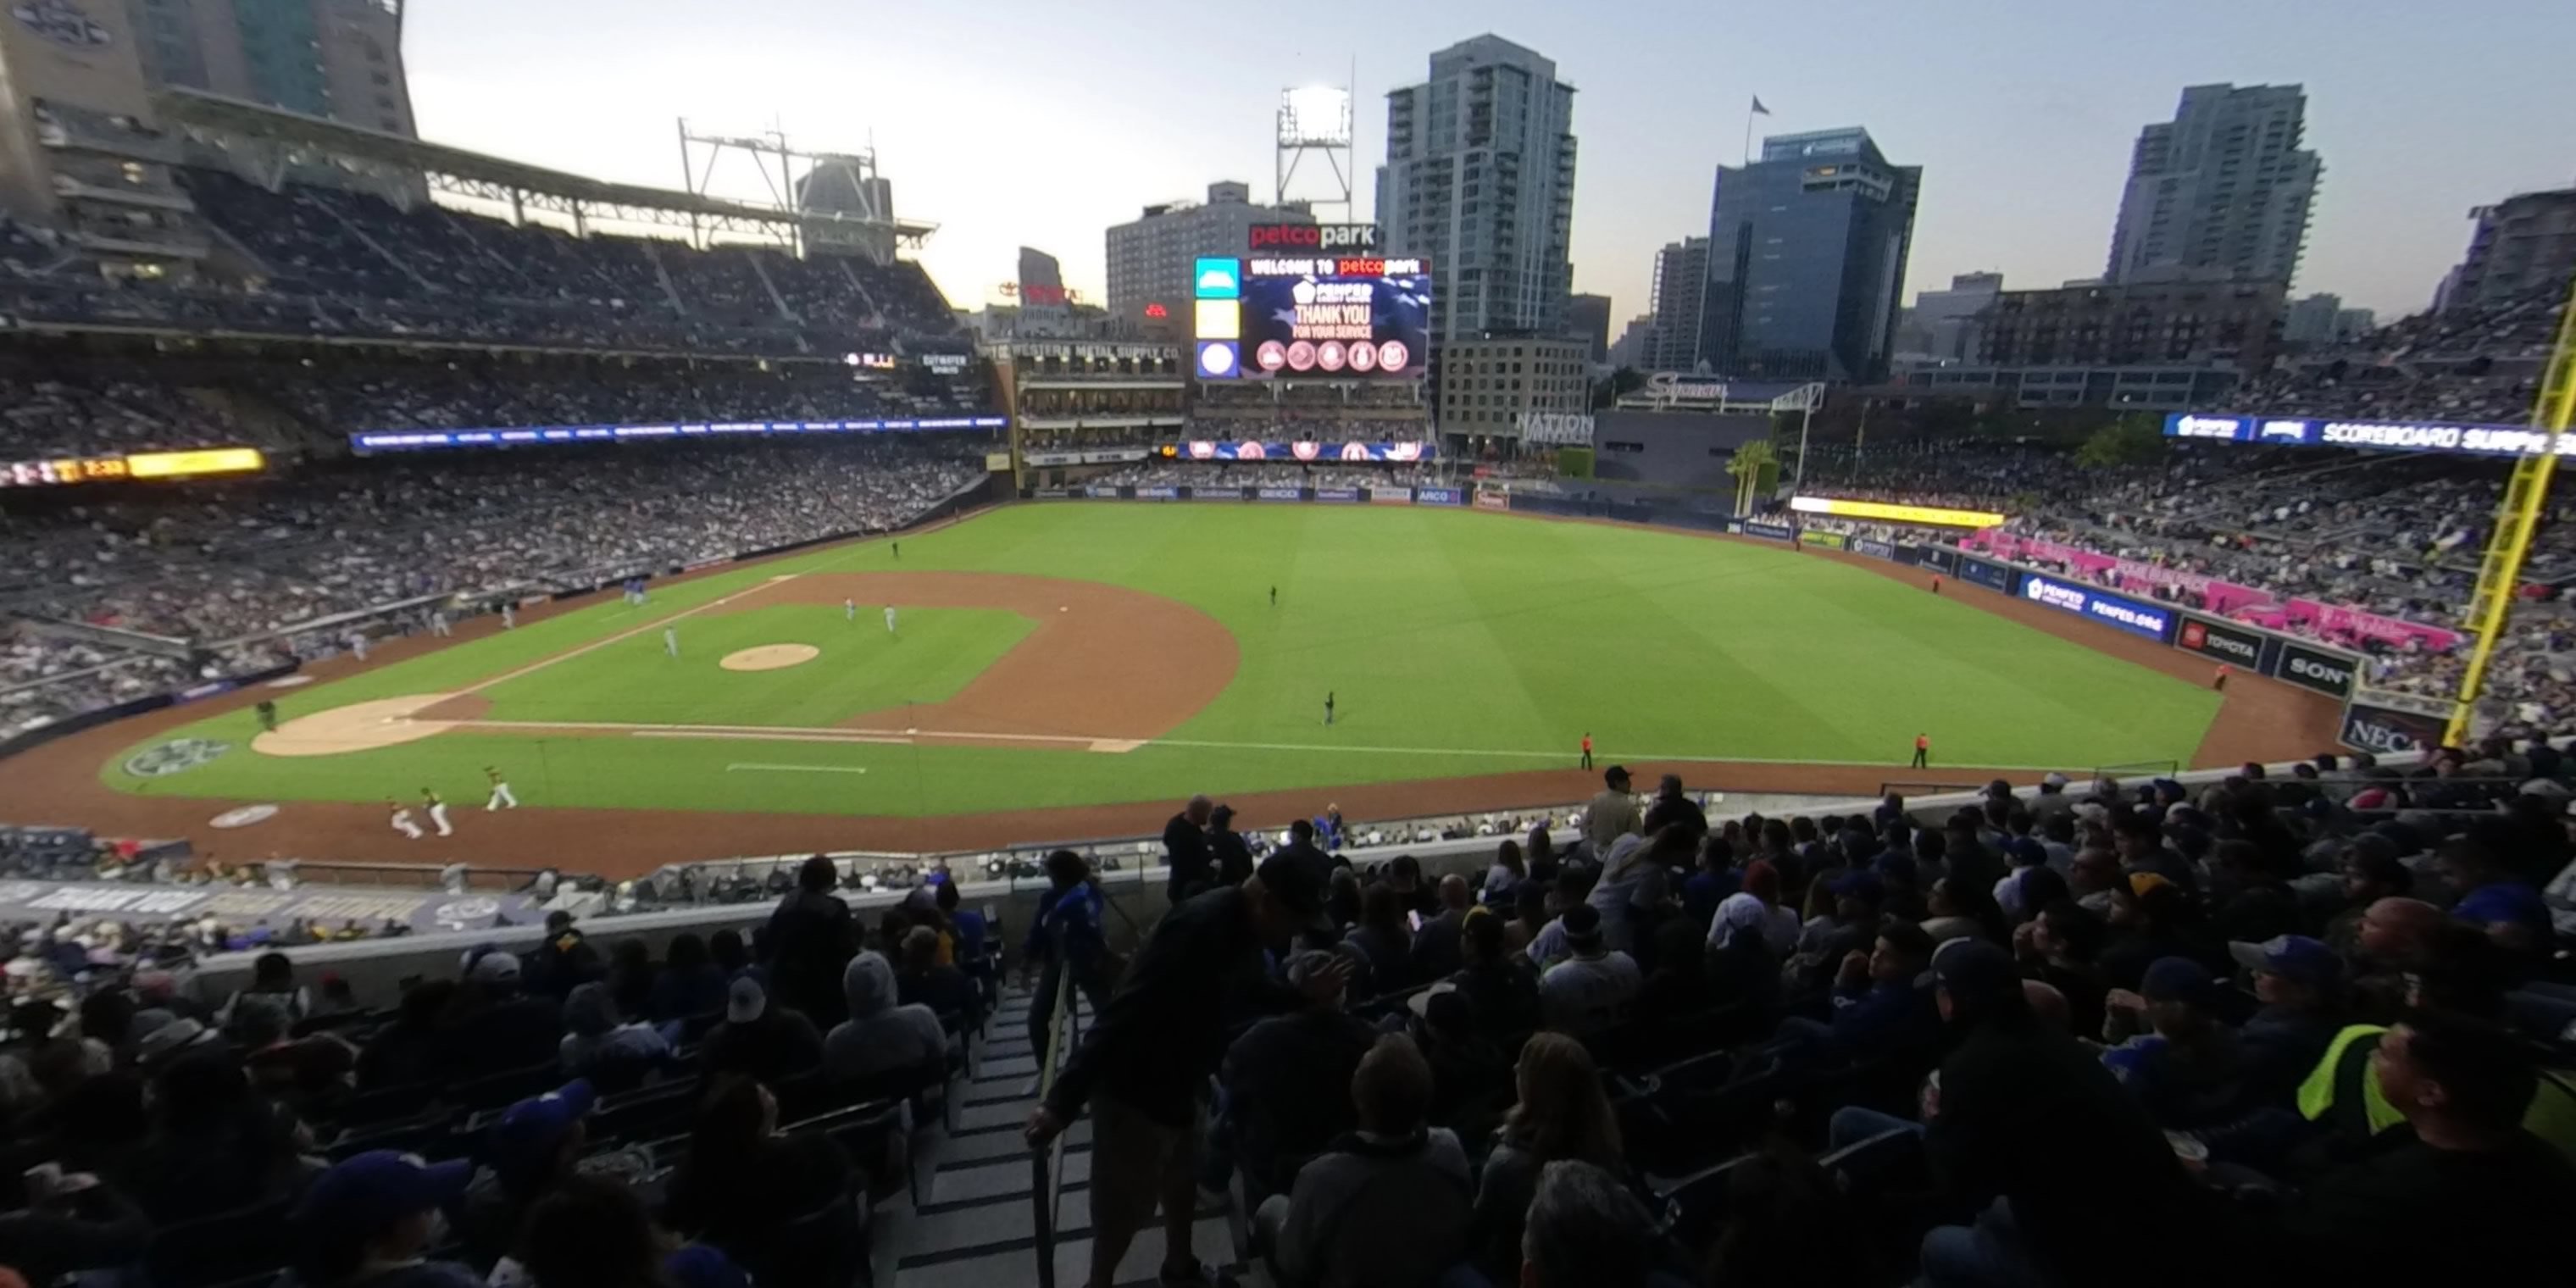 section 211 panoramic seat view  for baseball - petco park